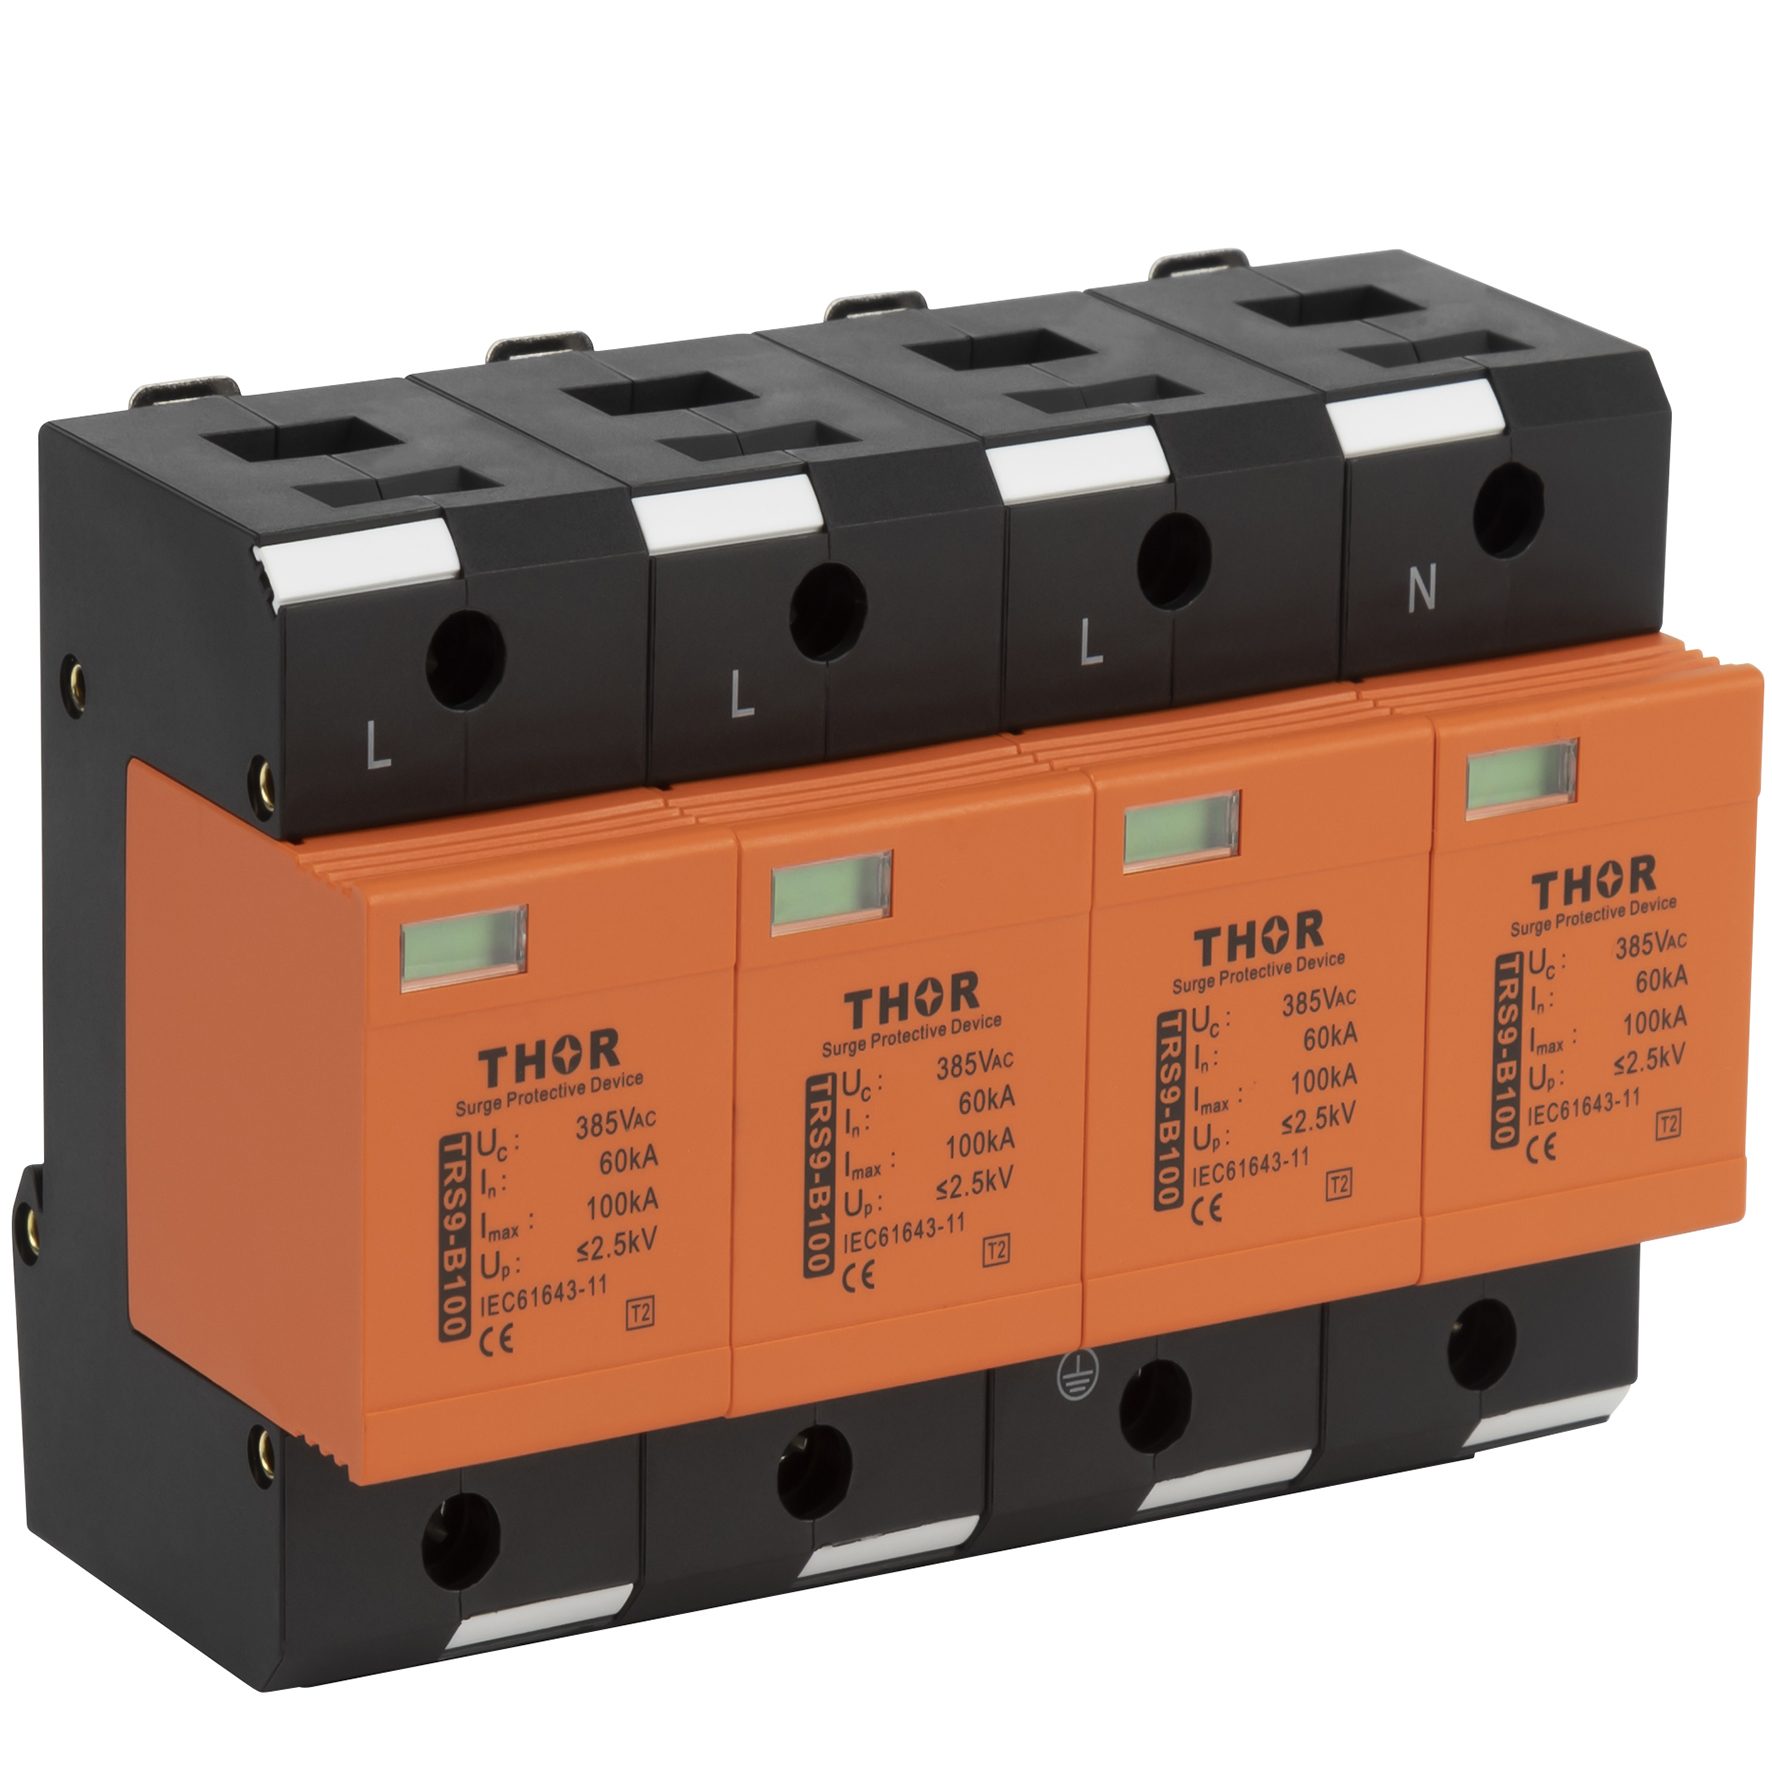 Type 2 AC surge protection device TRS9 series